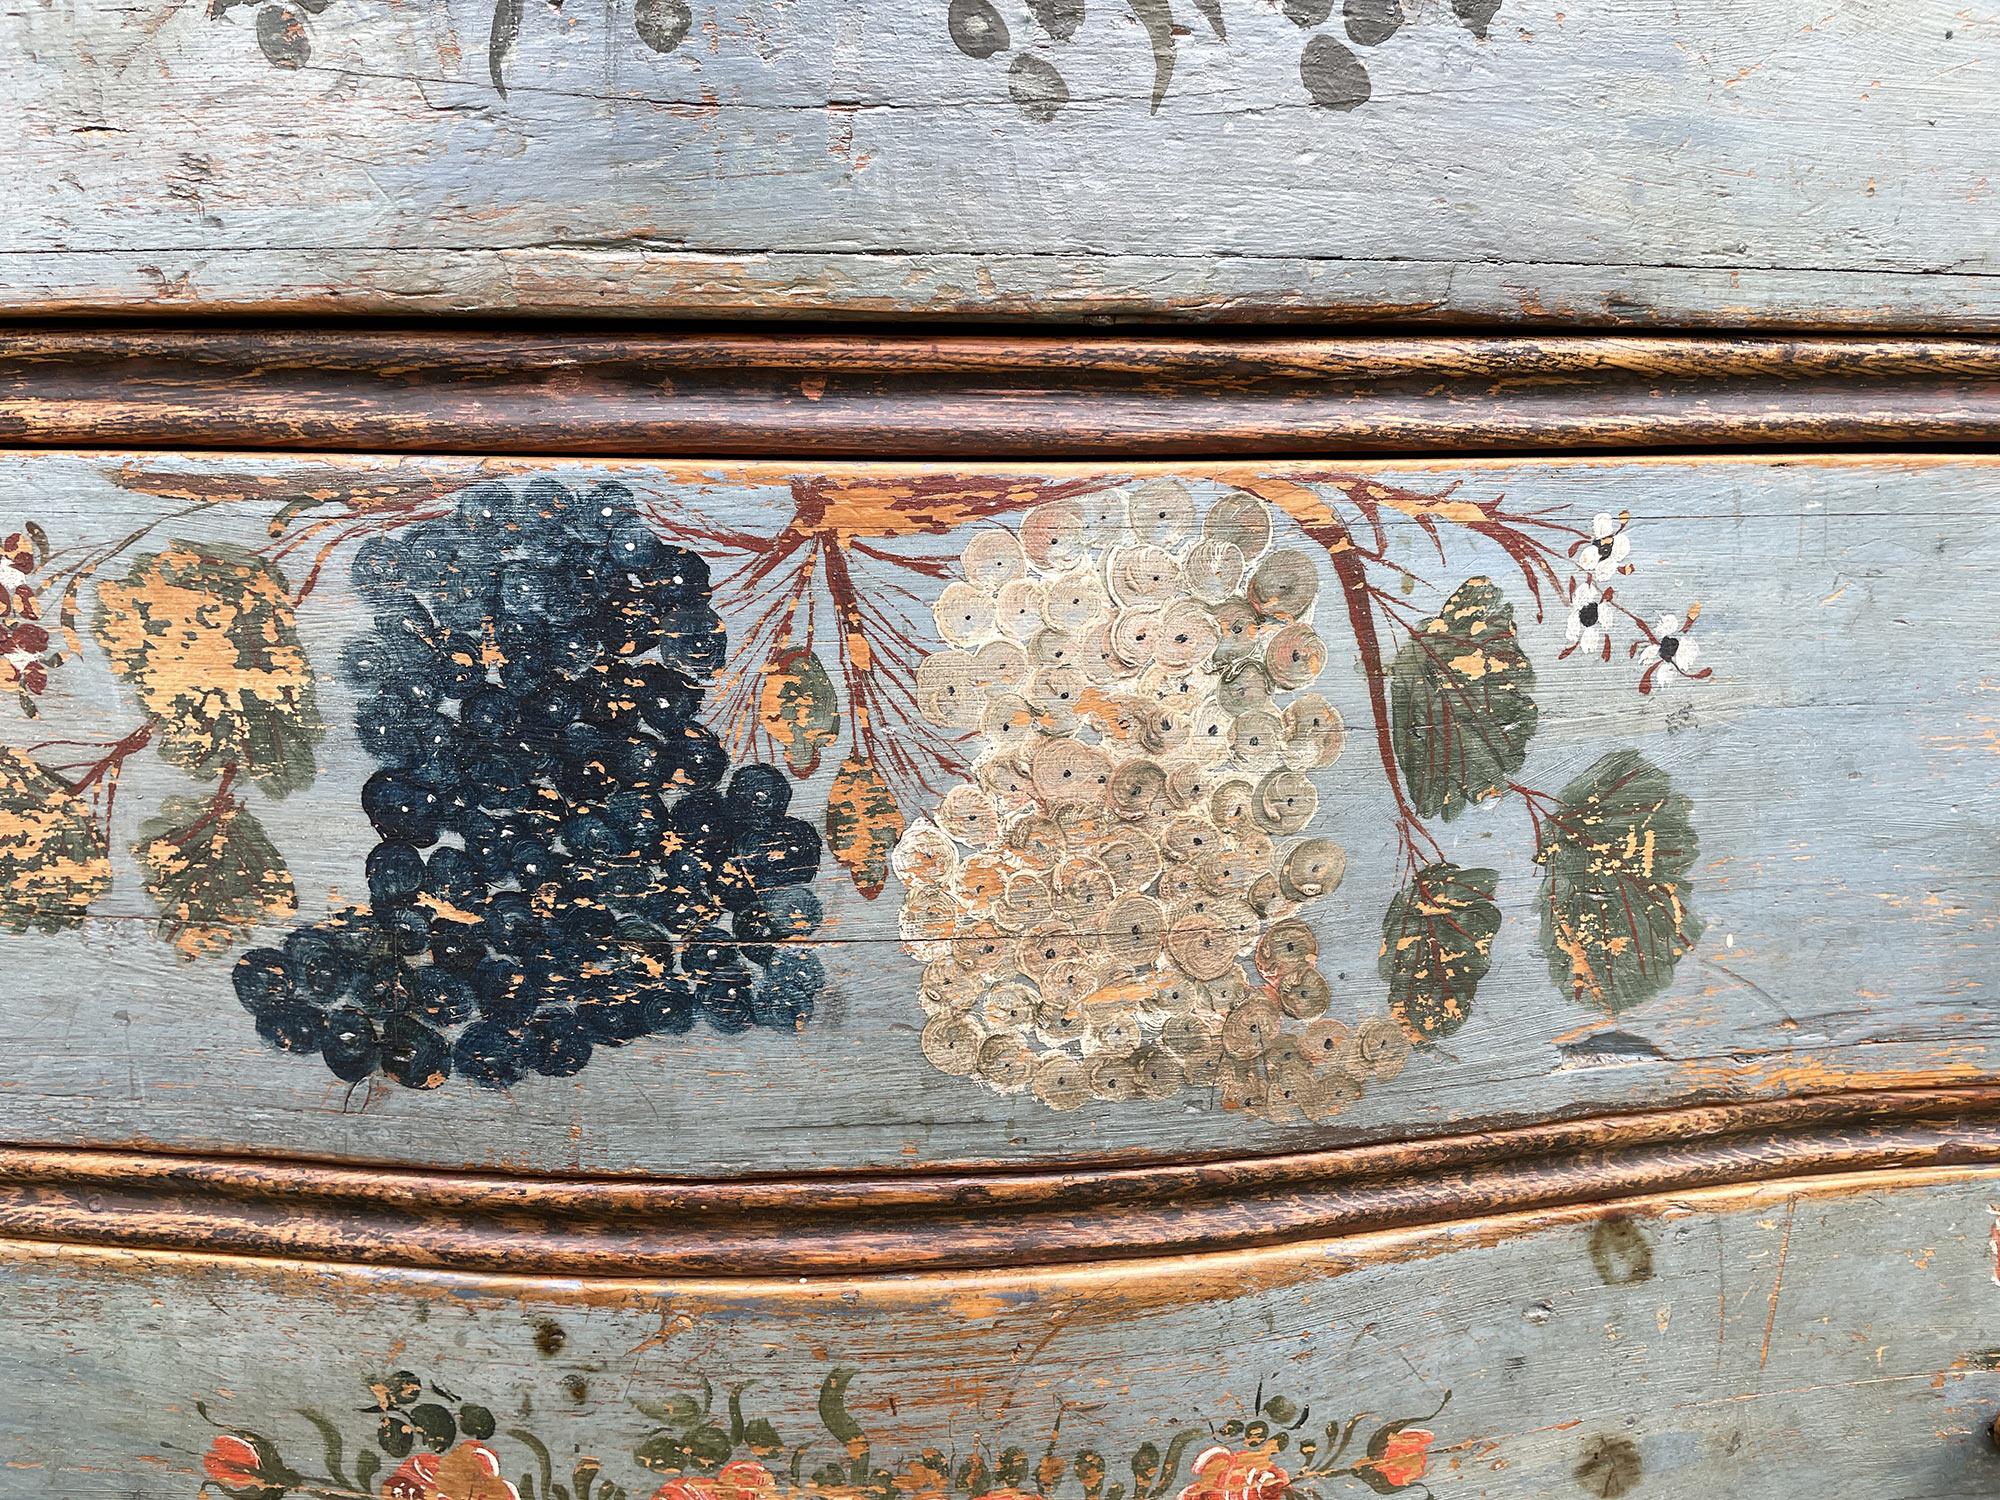 Fir 1780 Italian Shaped and Floral Painted Secretaire